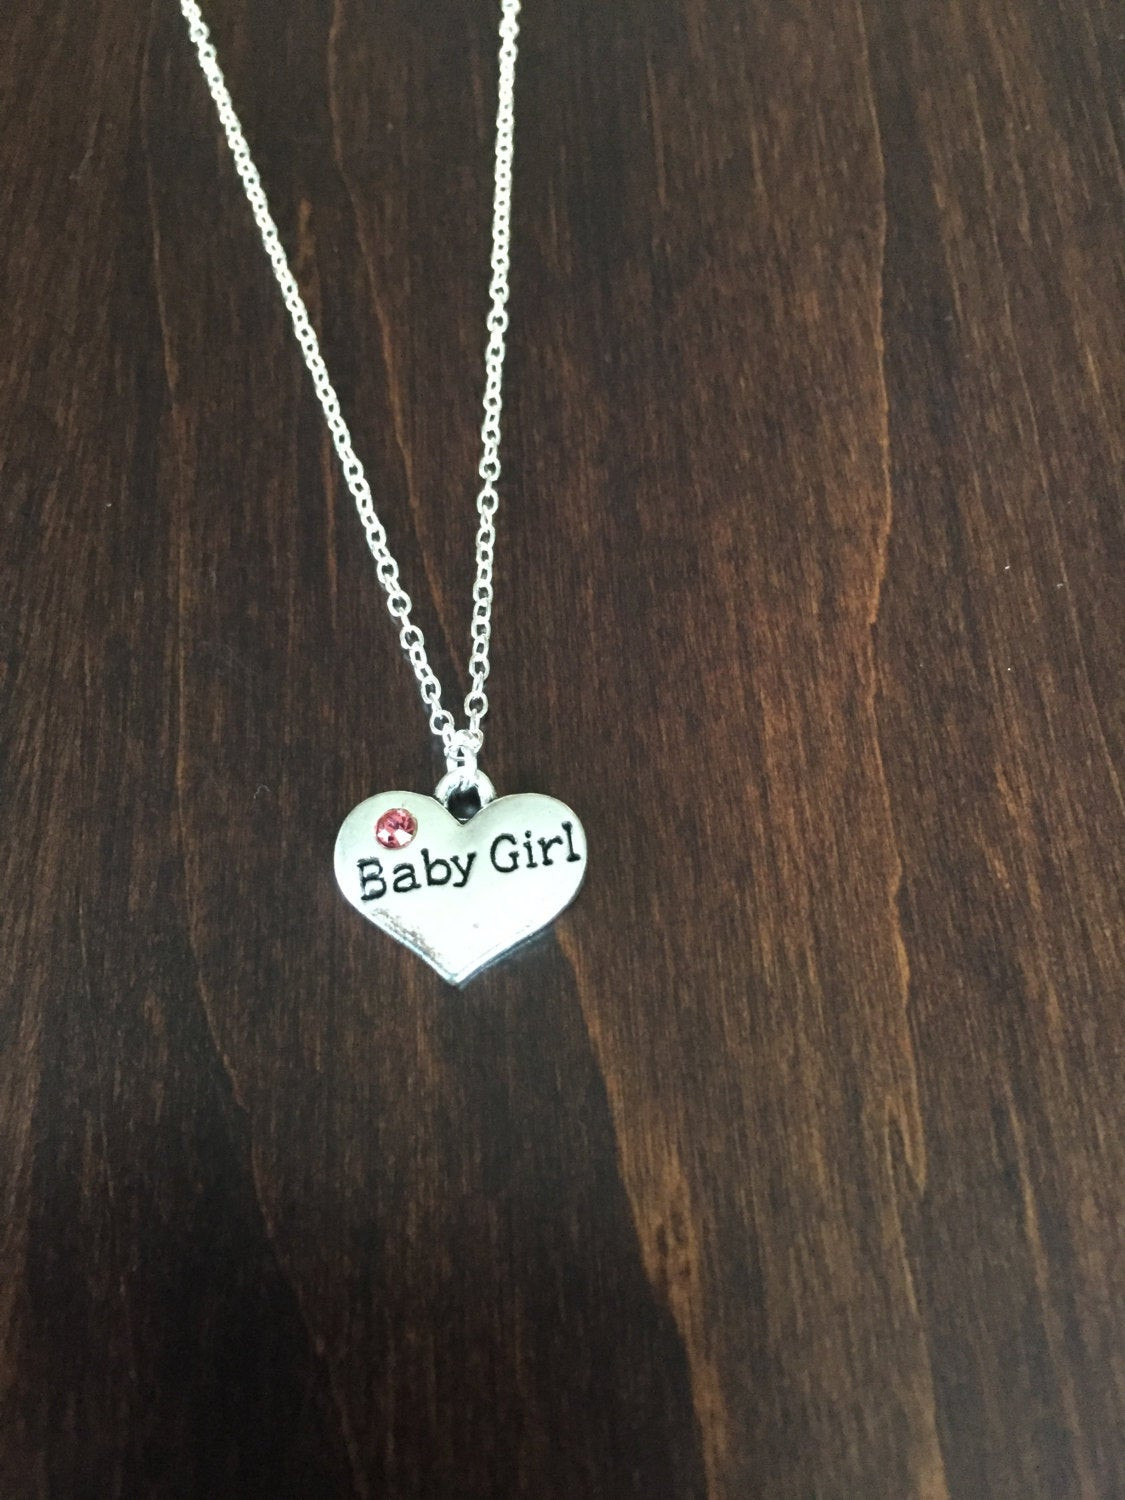 Baby Girl Necklace
 t for new mom baby girl necklace baby girl jewelry baby